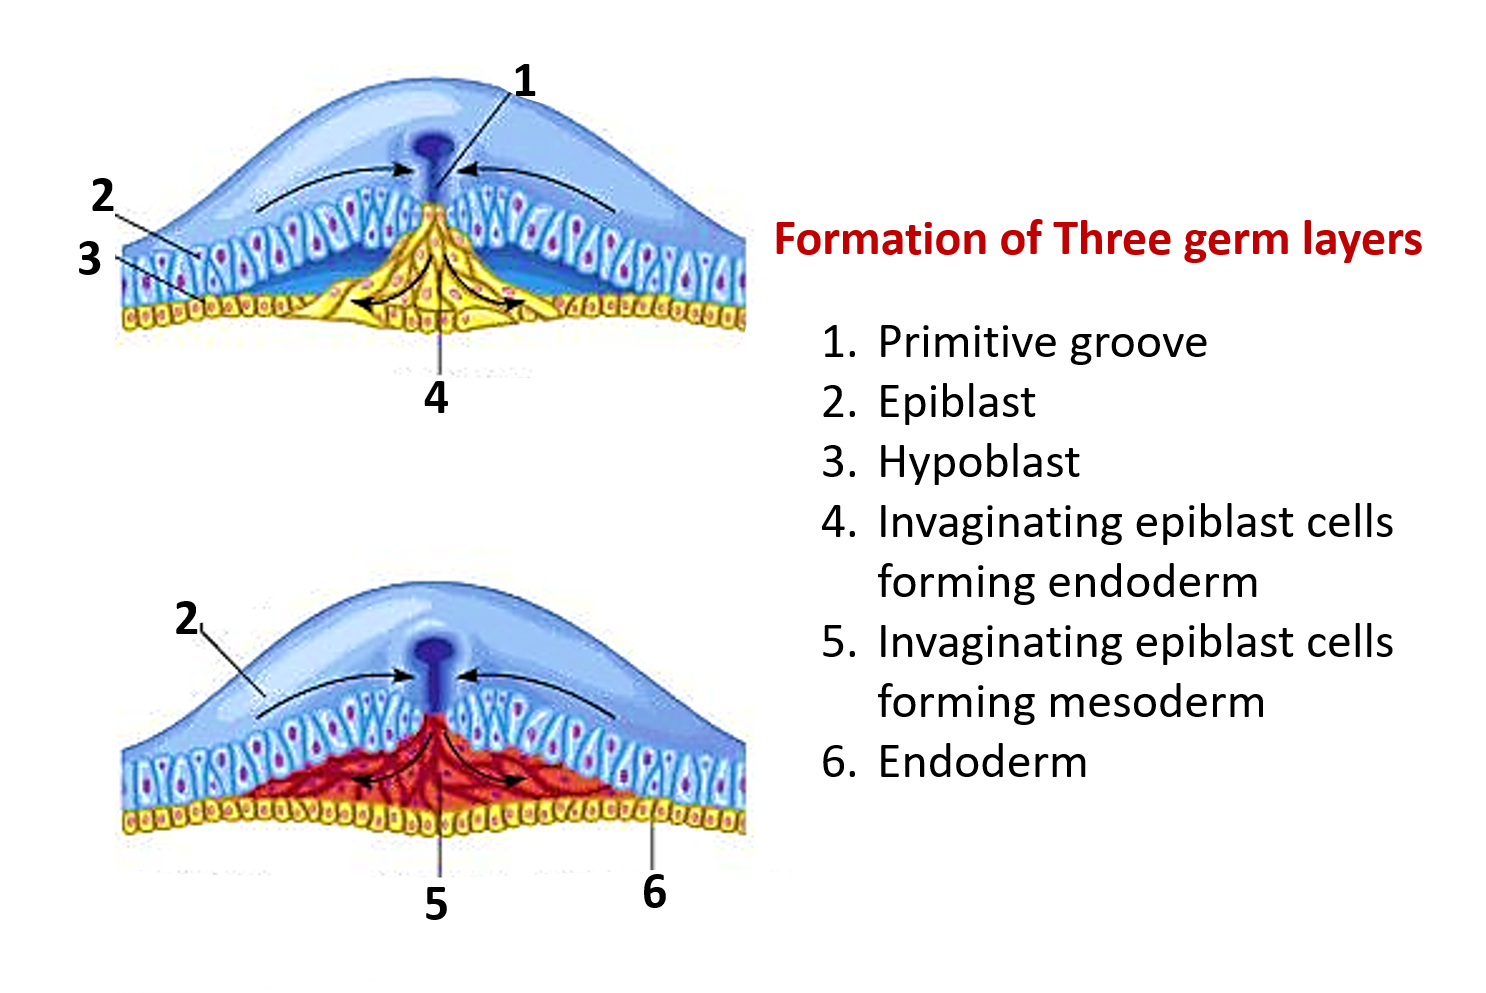 formation of three germ layers- ectoderm, mesoderm and endoder.